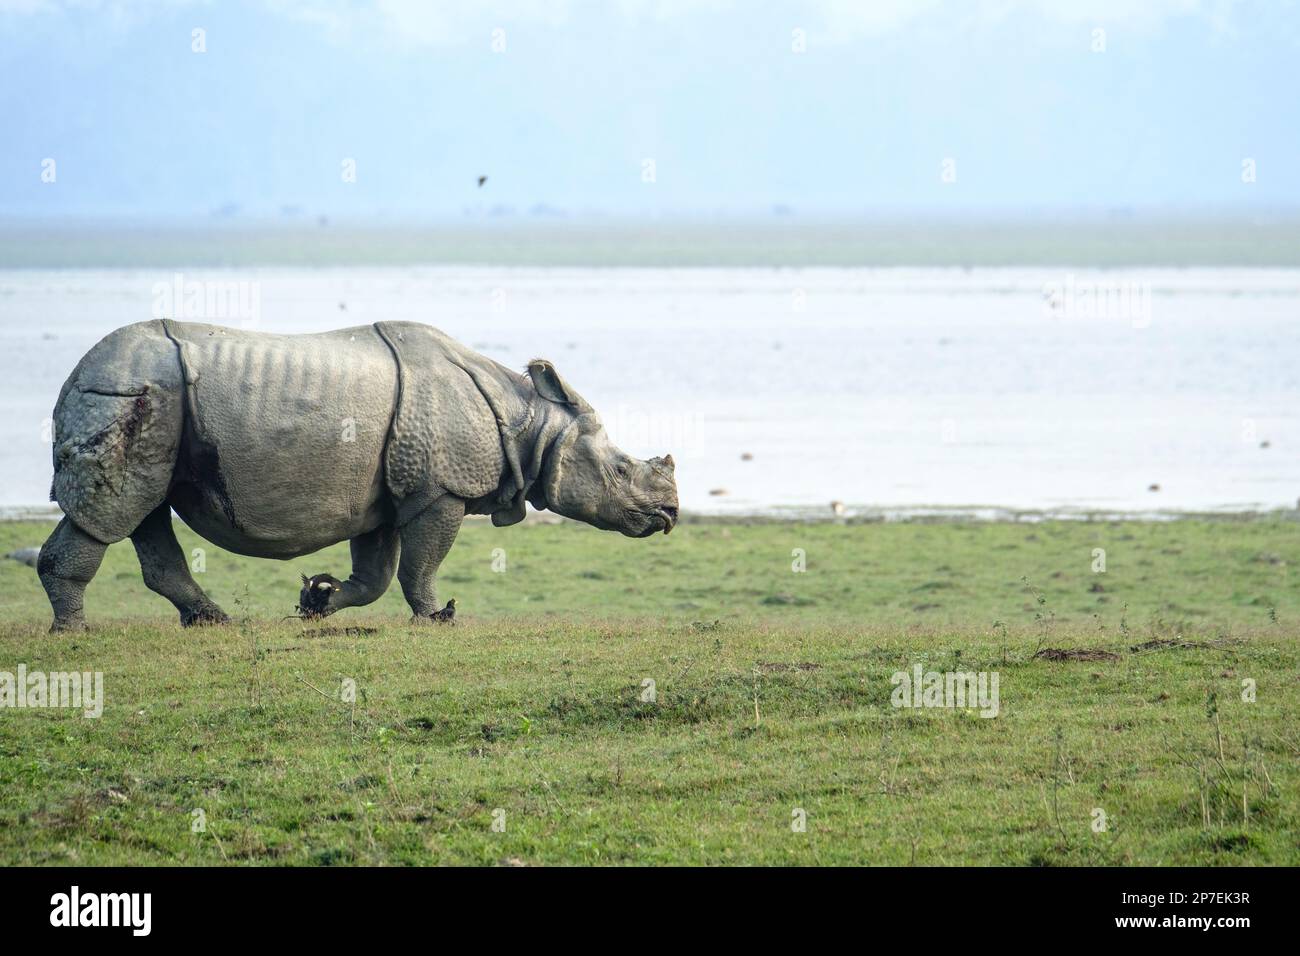 Indian Rhino Rhinoceros unicornis, crosses from left-to-right grassland in front of a river. Kaziranga National Park, Assam, India Stock Photo